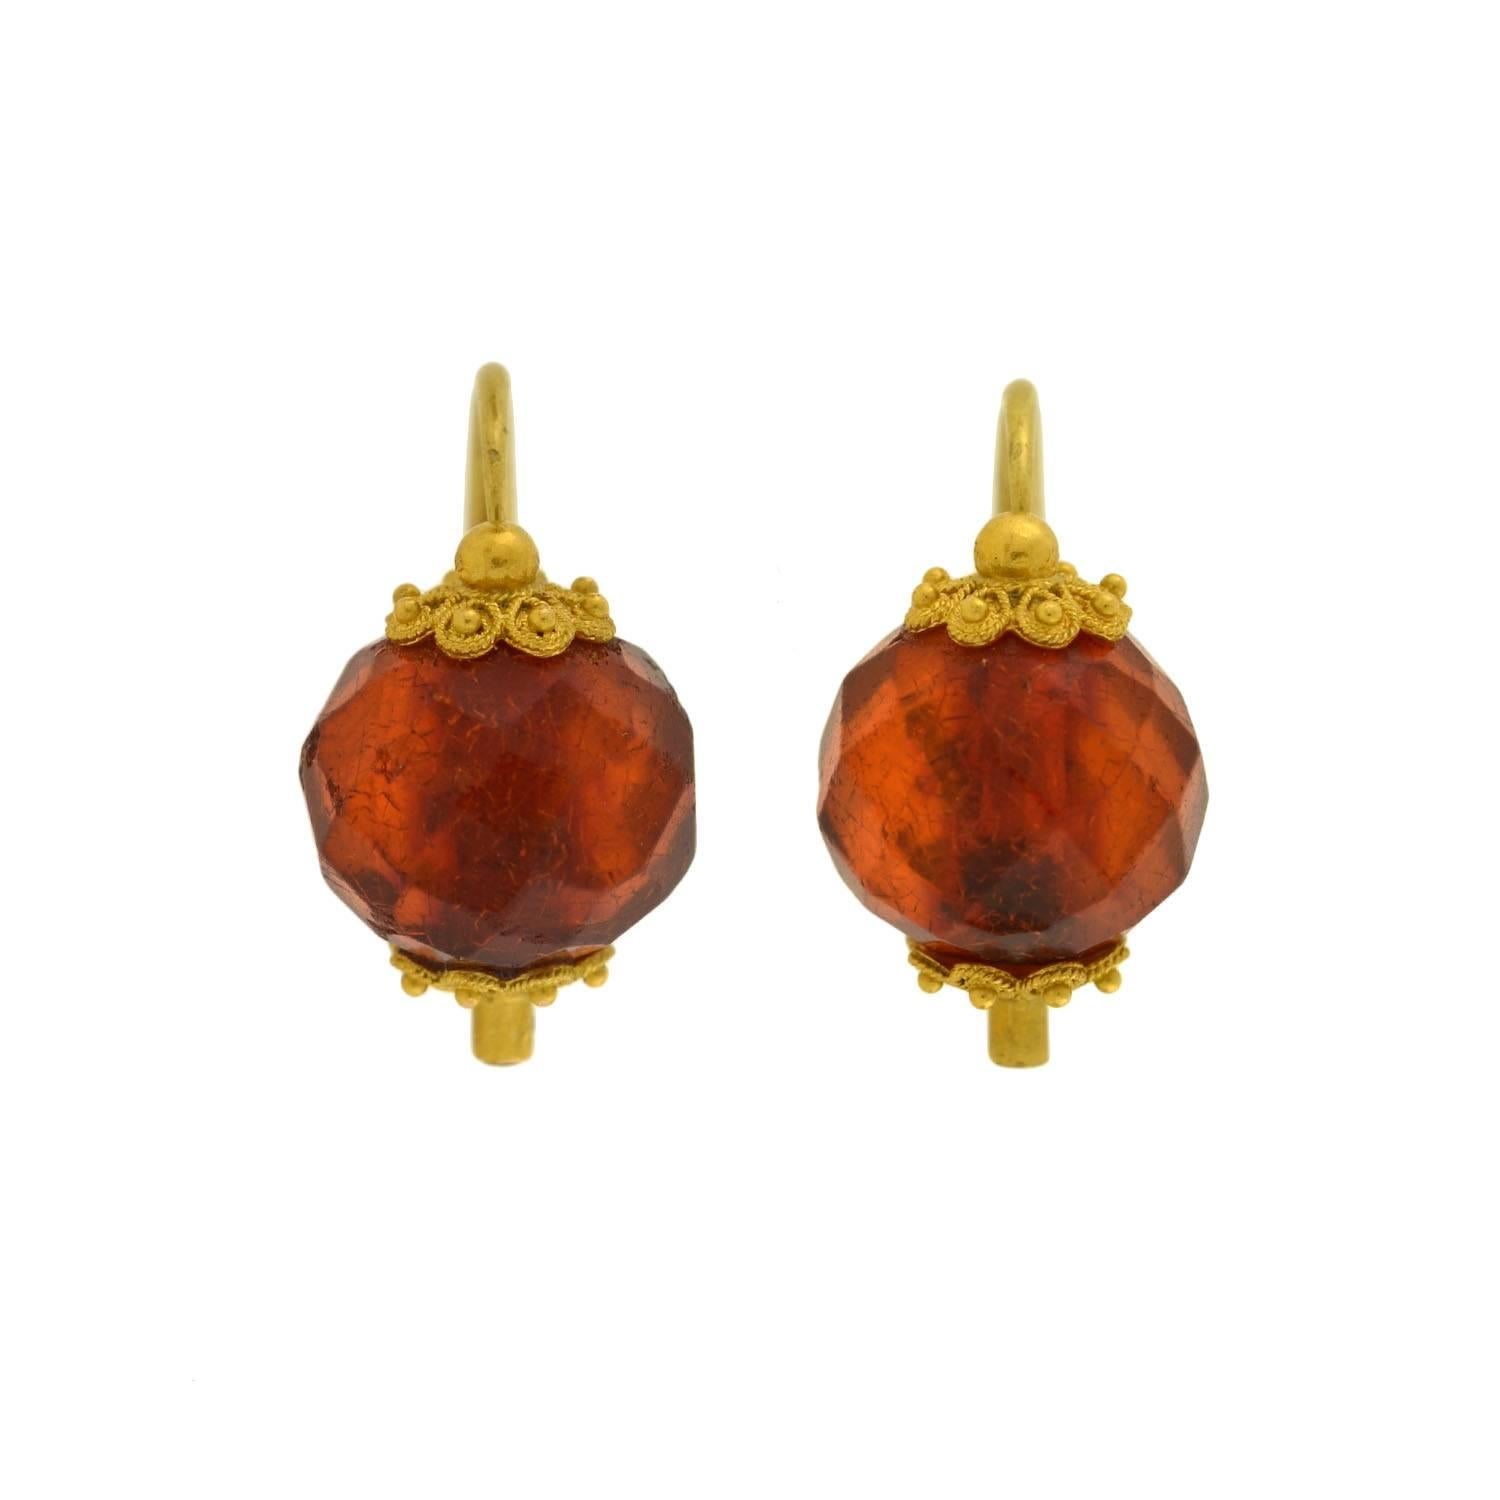 A gorgeous pair of amber earrings from the Victorian (ca1880) era! Each of these earrings has a convertible "day & night" design that incorporates a teardrop base and faceted bead topper. The 18kt yellow gold Etruscan setting combines